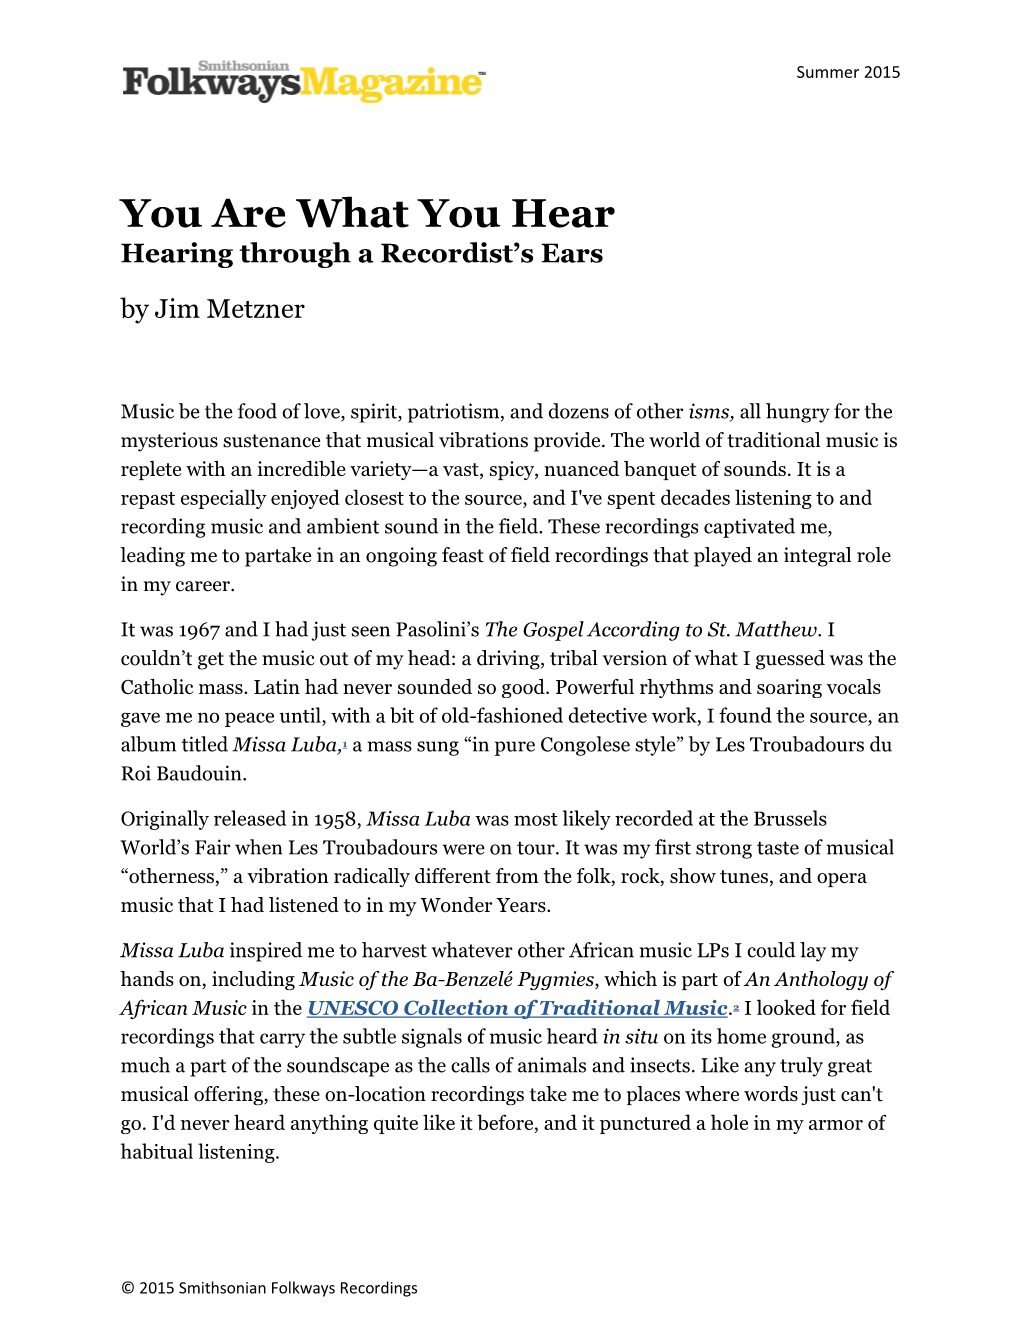 You Are What You Hear Hearing Through a Recordist’S Ears by Jim Metzner